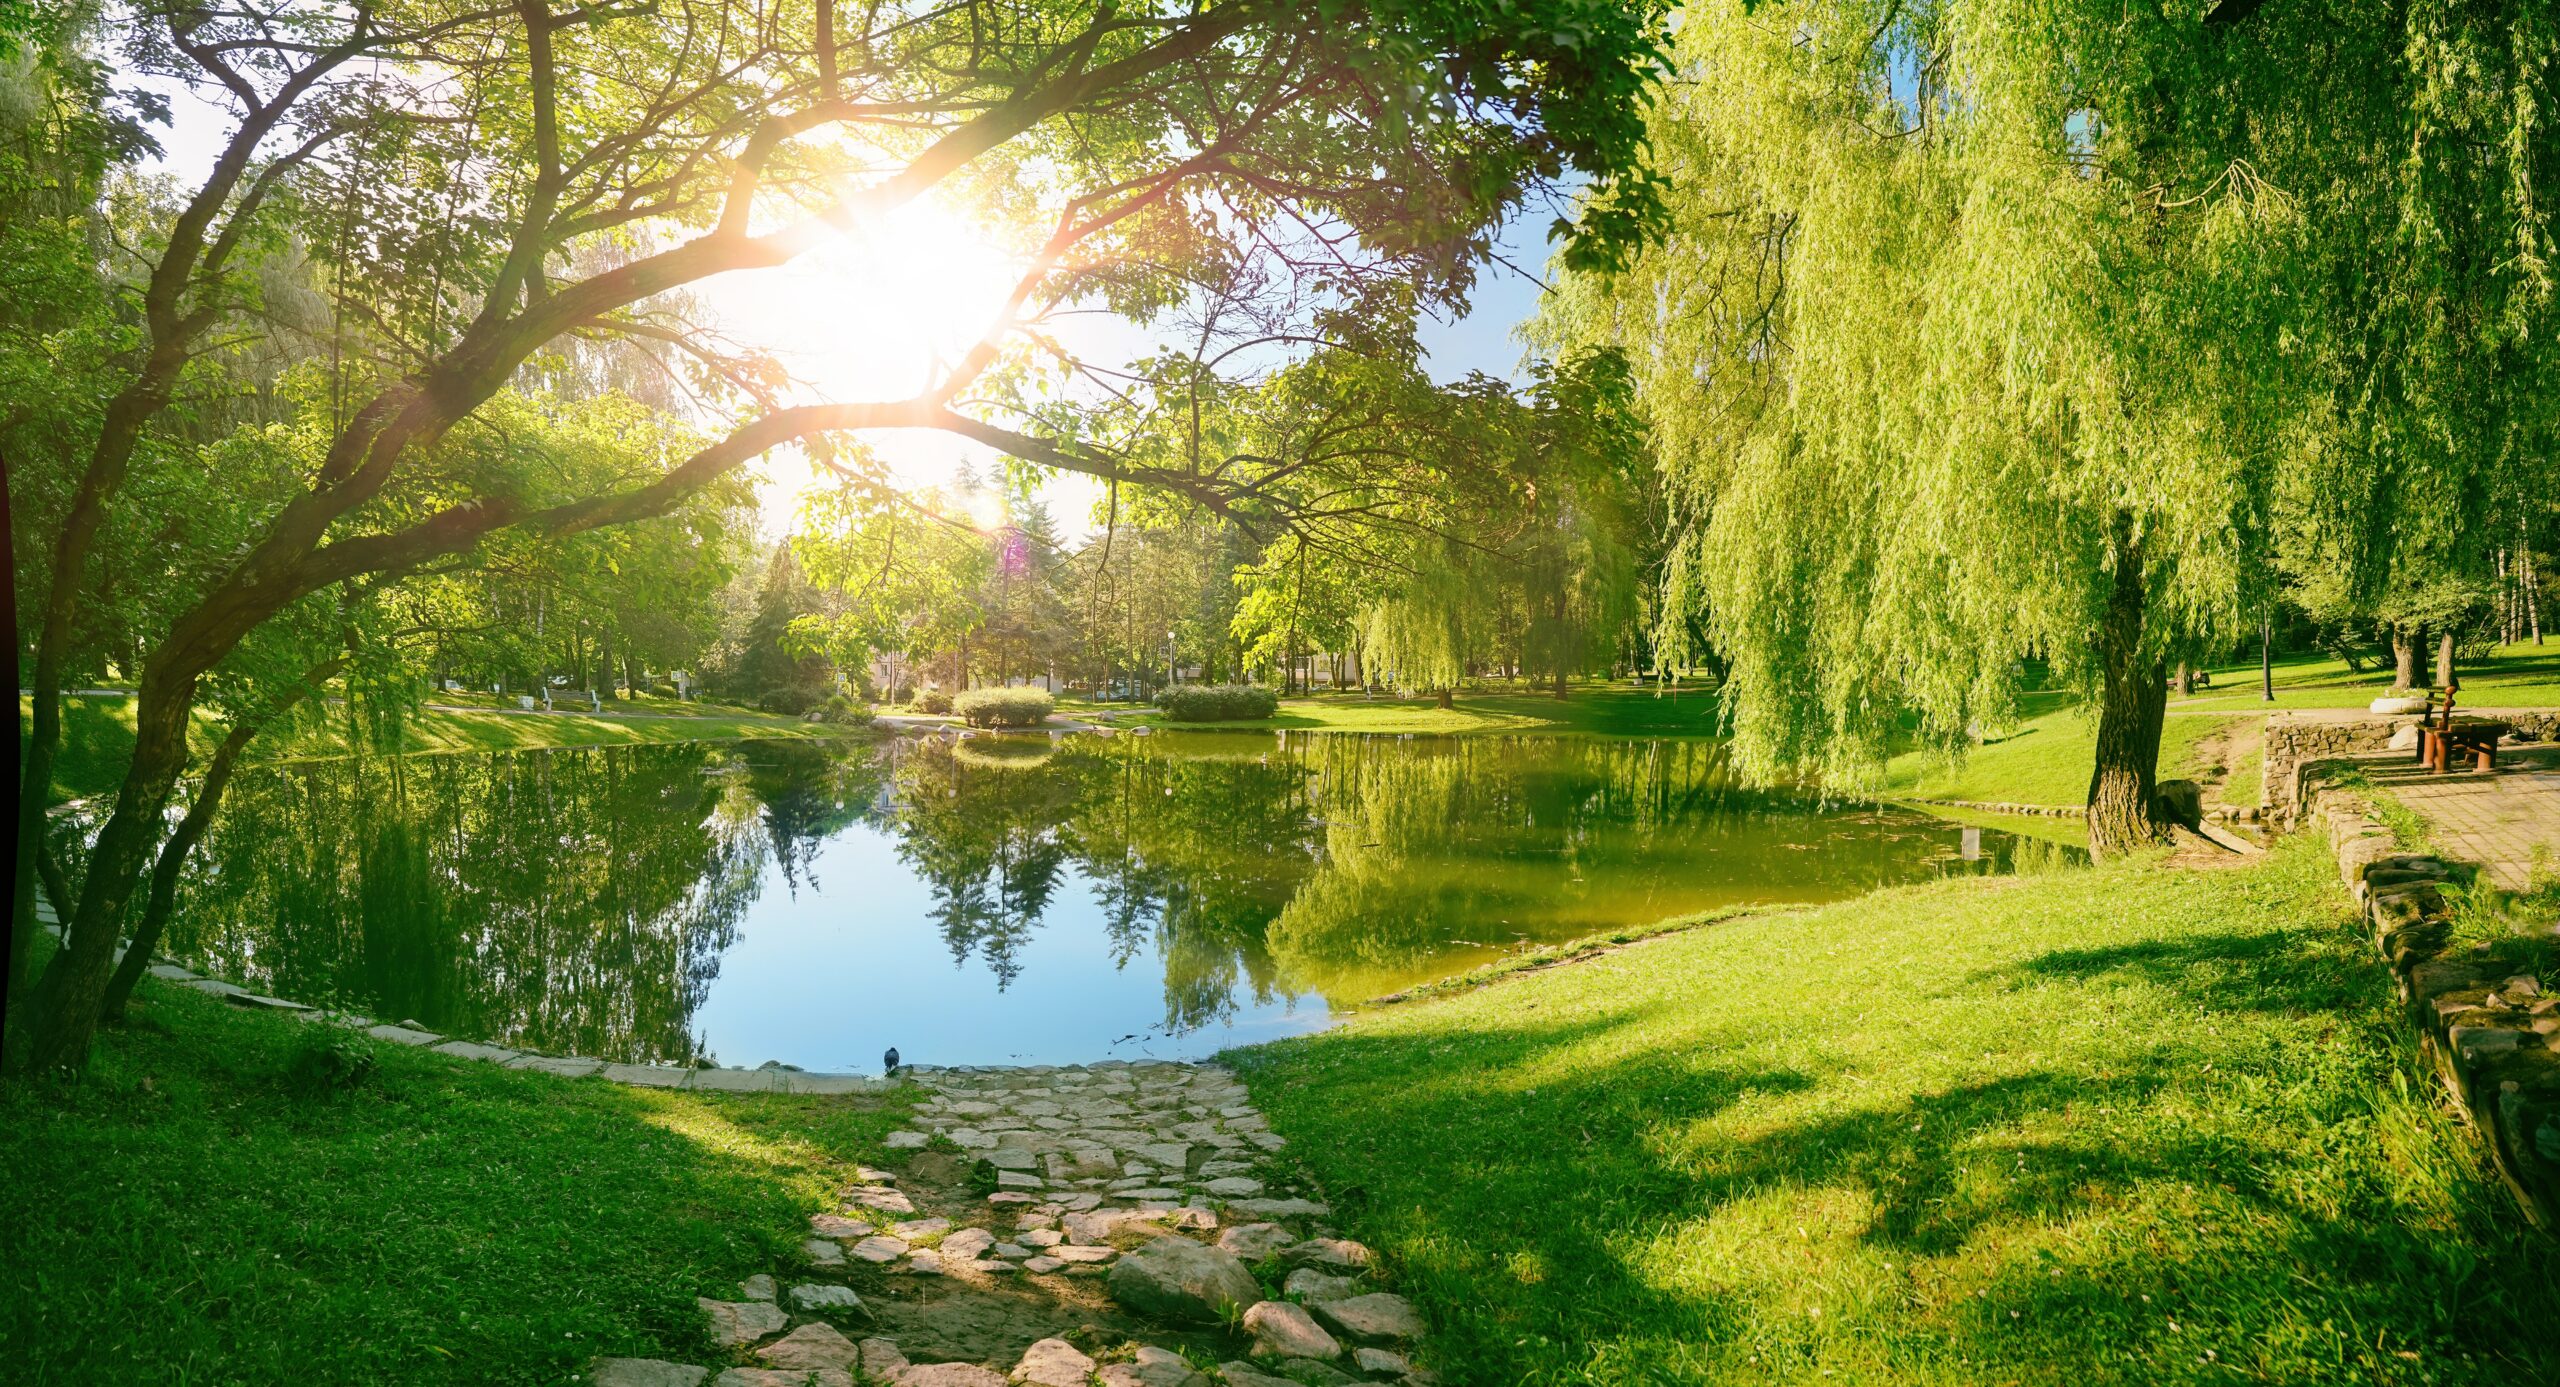 A serene park scene with a stone pathway leading to a calm, reflective pond surrounded by lush green trees and sunlight filtering through the branches.